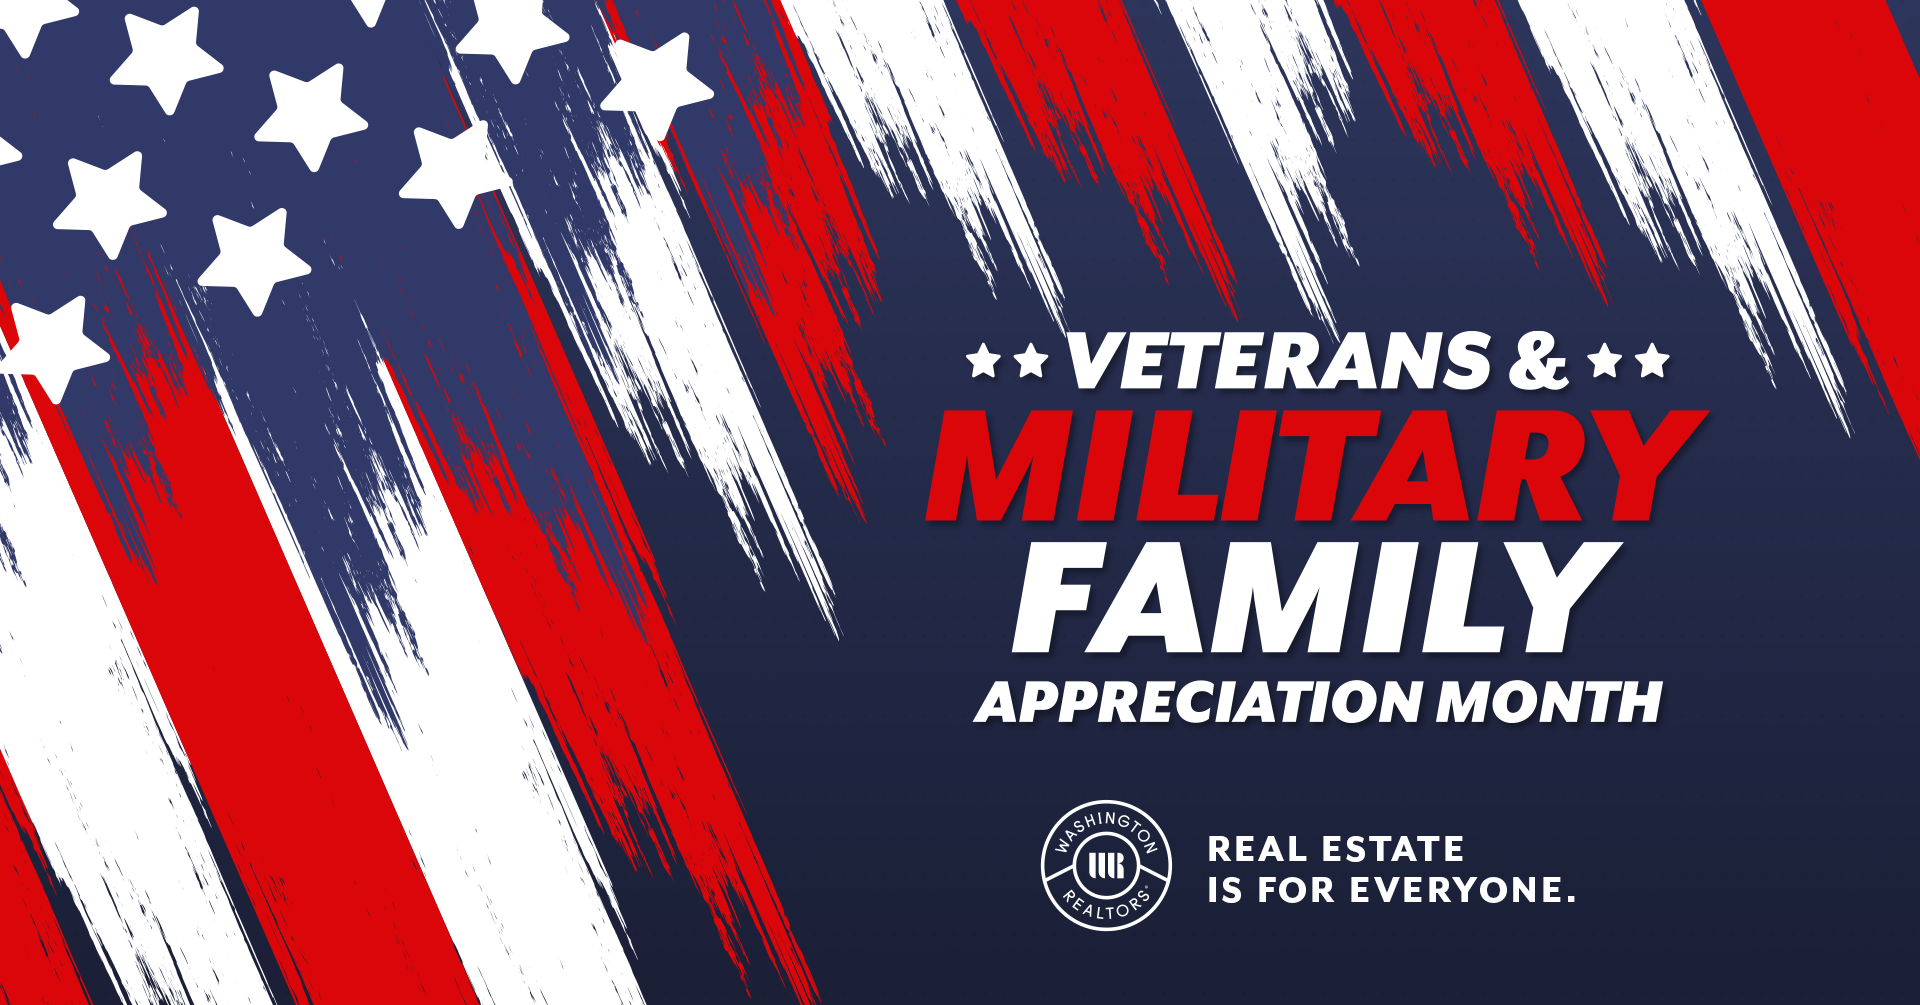 Military-Family_FB-Event-Cover_1920x1005